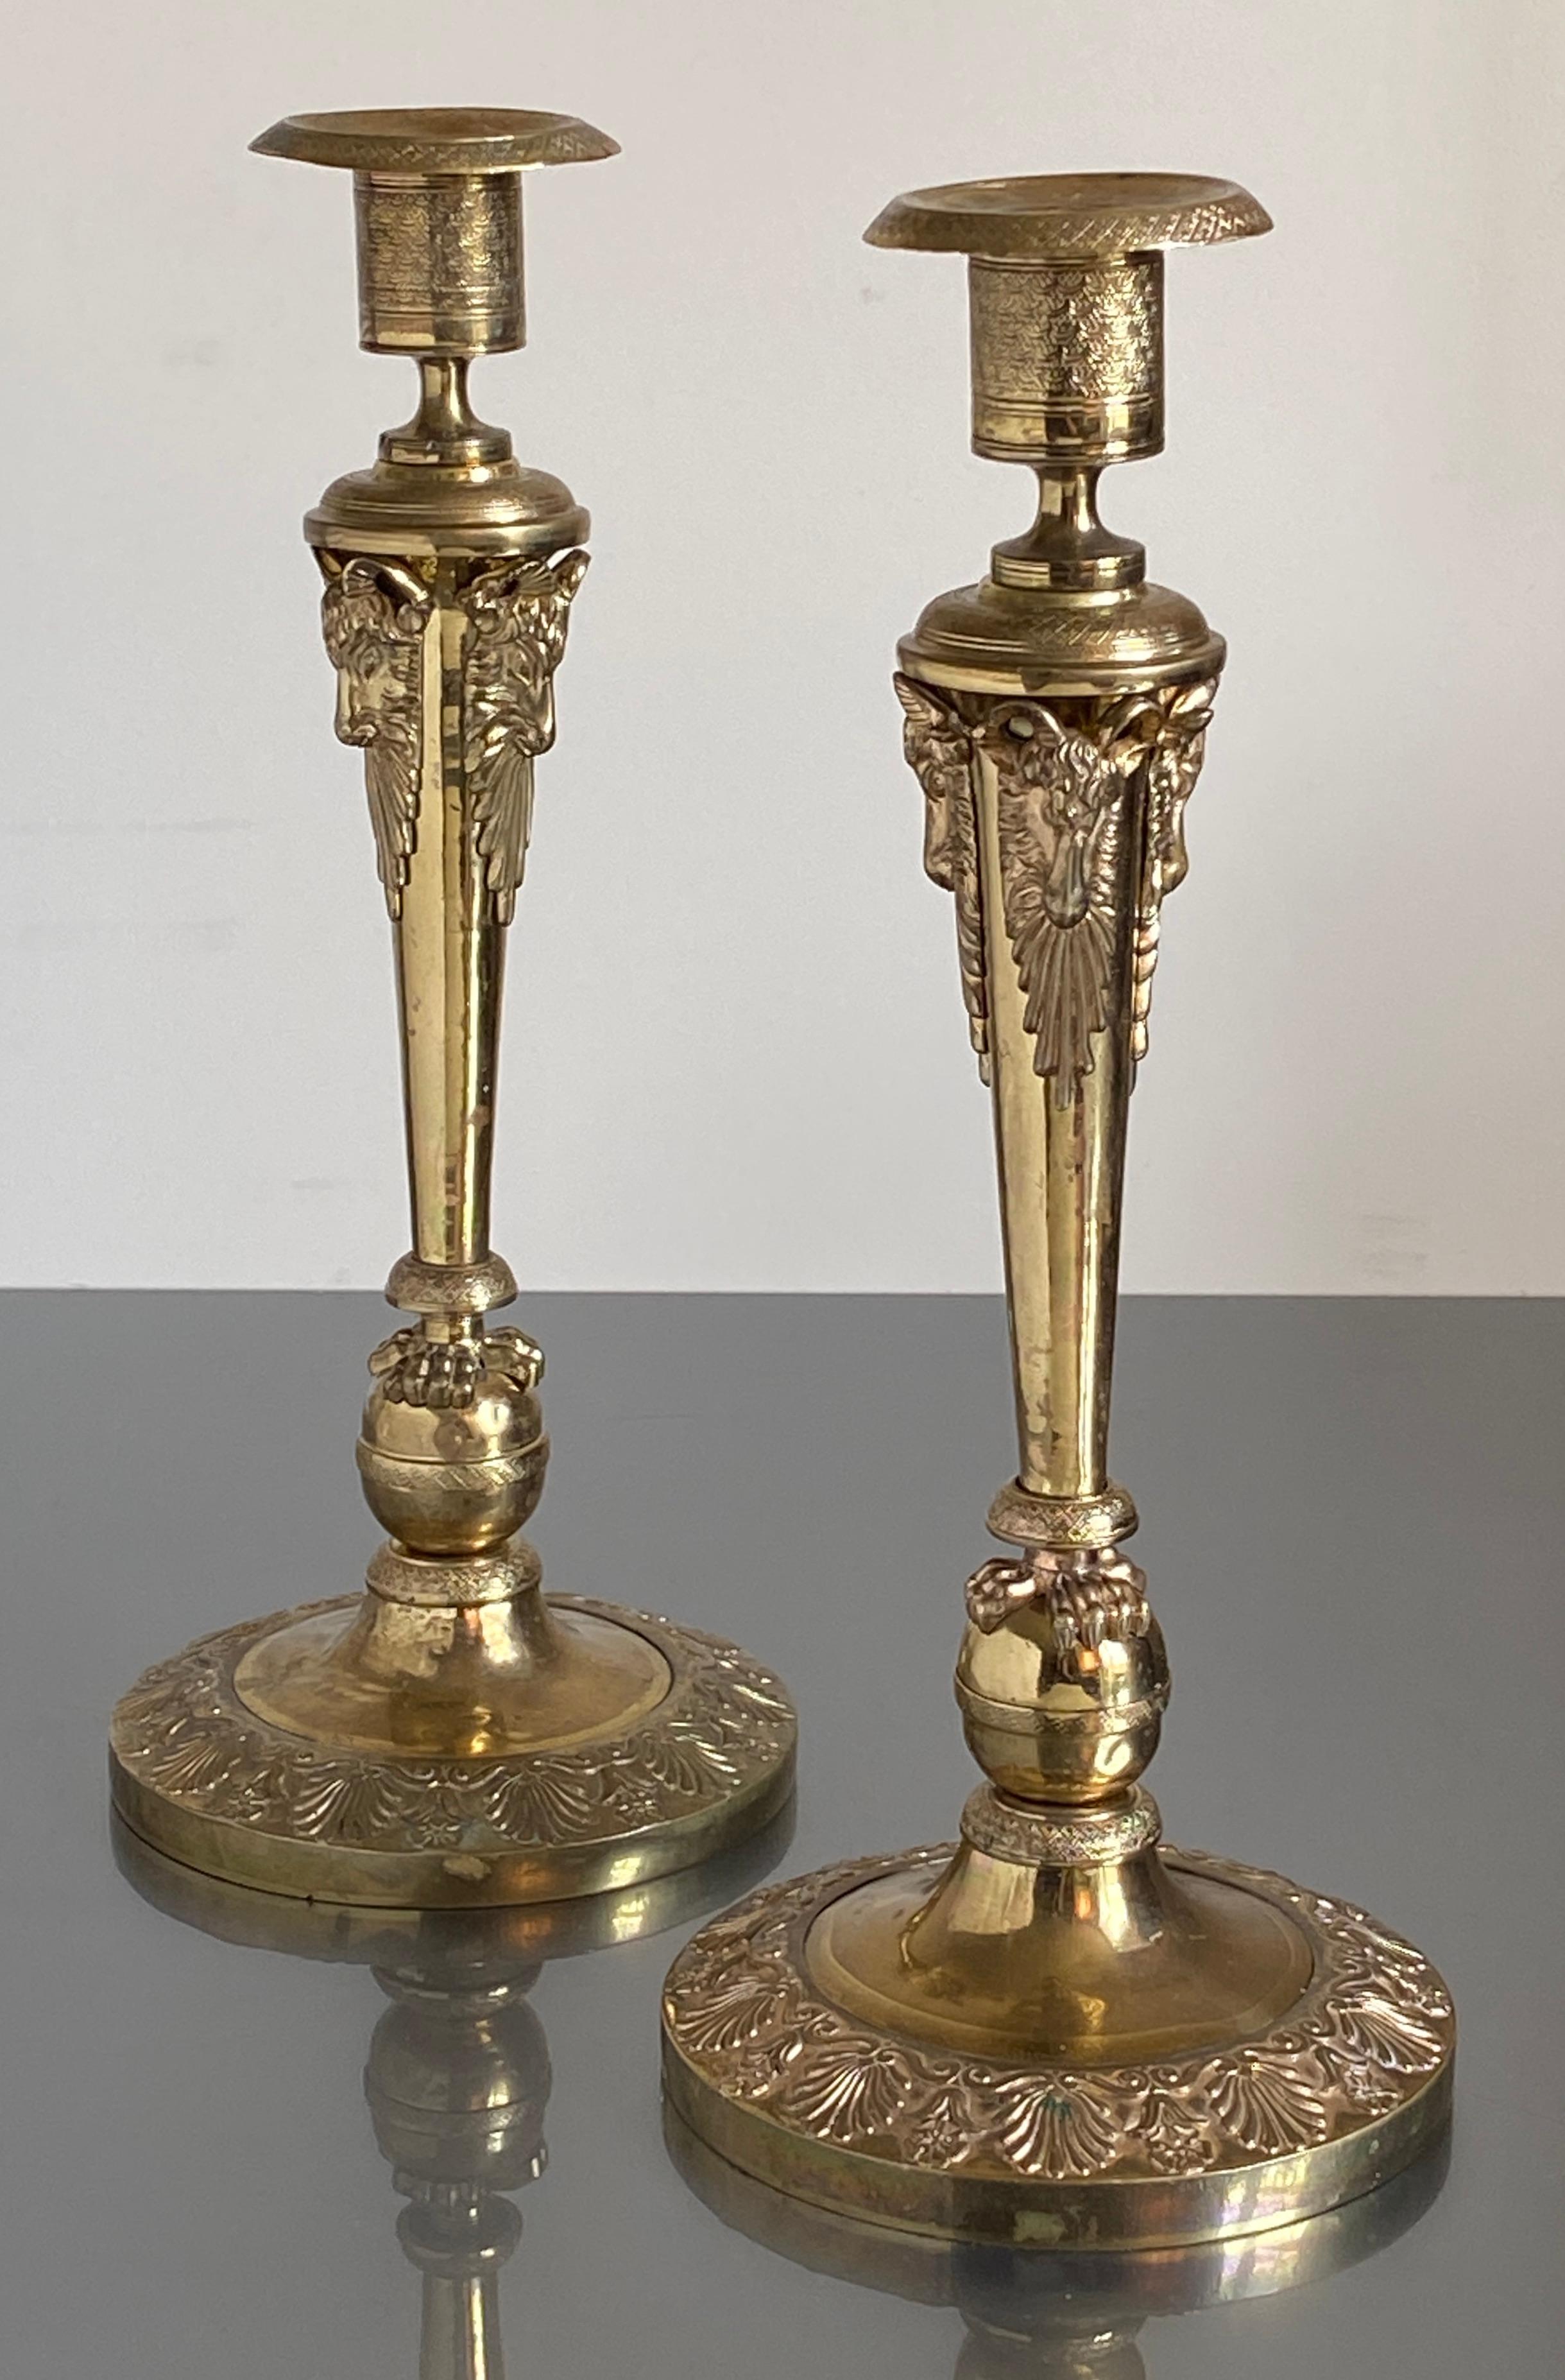 Russian Empire Gilt Bronze Candlesticks in the manner Pierre-Philippe Thomire